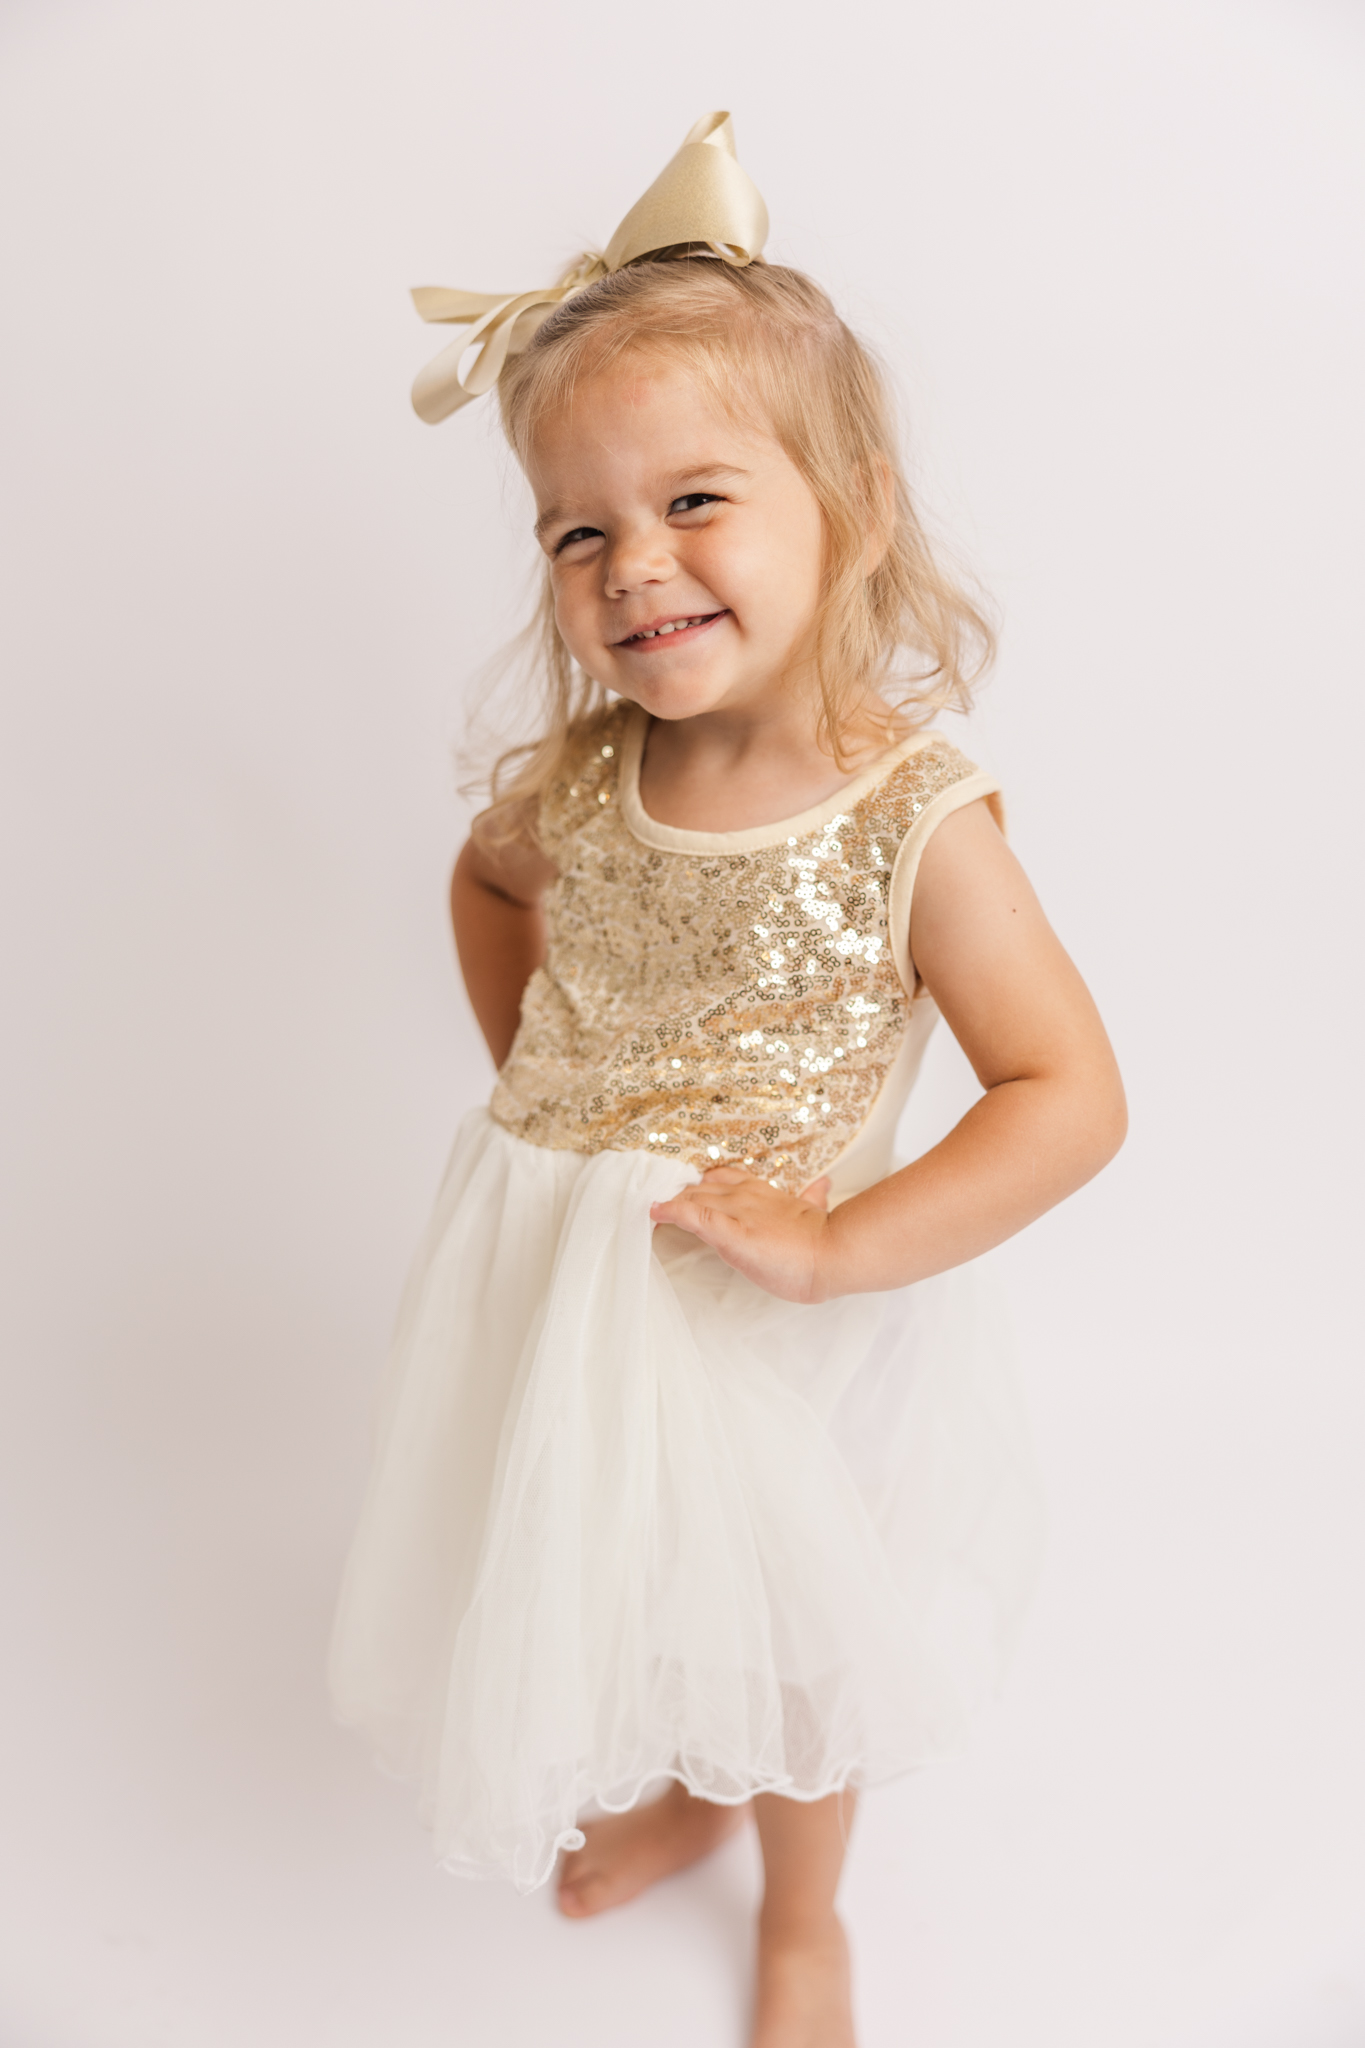 Two year old showing off her attitude during milestone session in the studio my Molly Berry Photography.